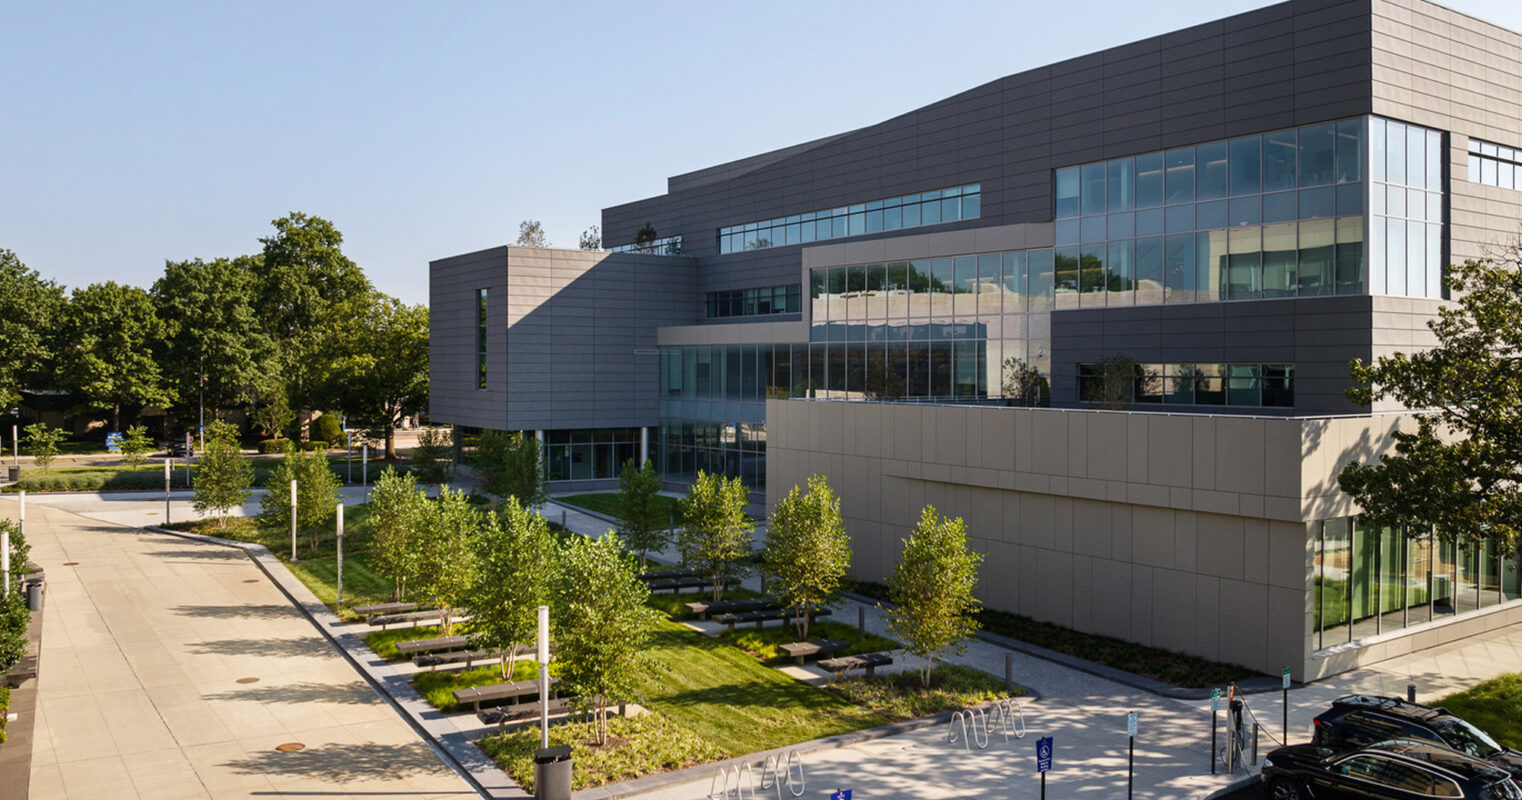 Modern educational building with a sleek design featuring expansive windows and a landscaped approach, with students and visitors making their way along the accessible pathways on a sunny day.